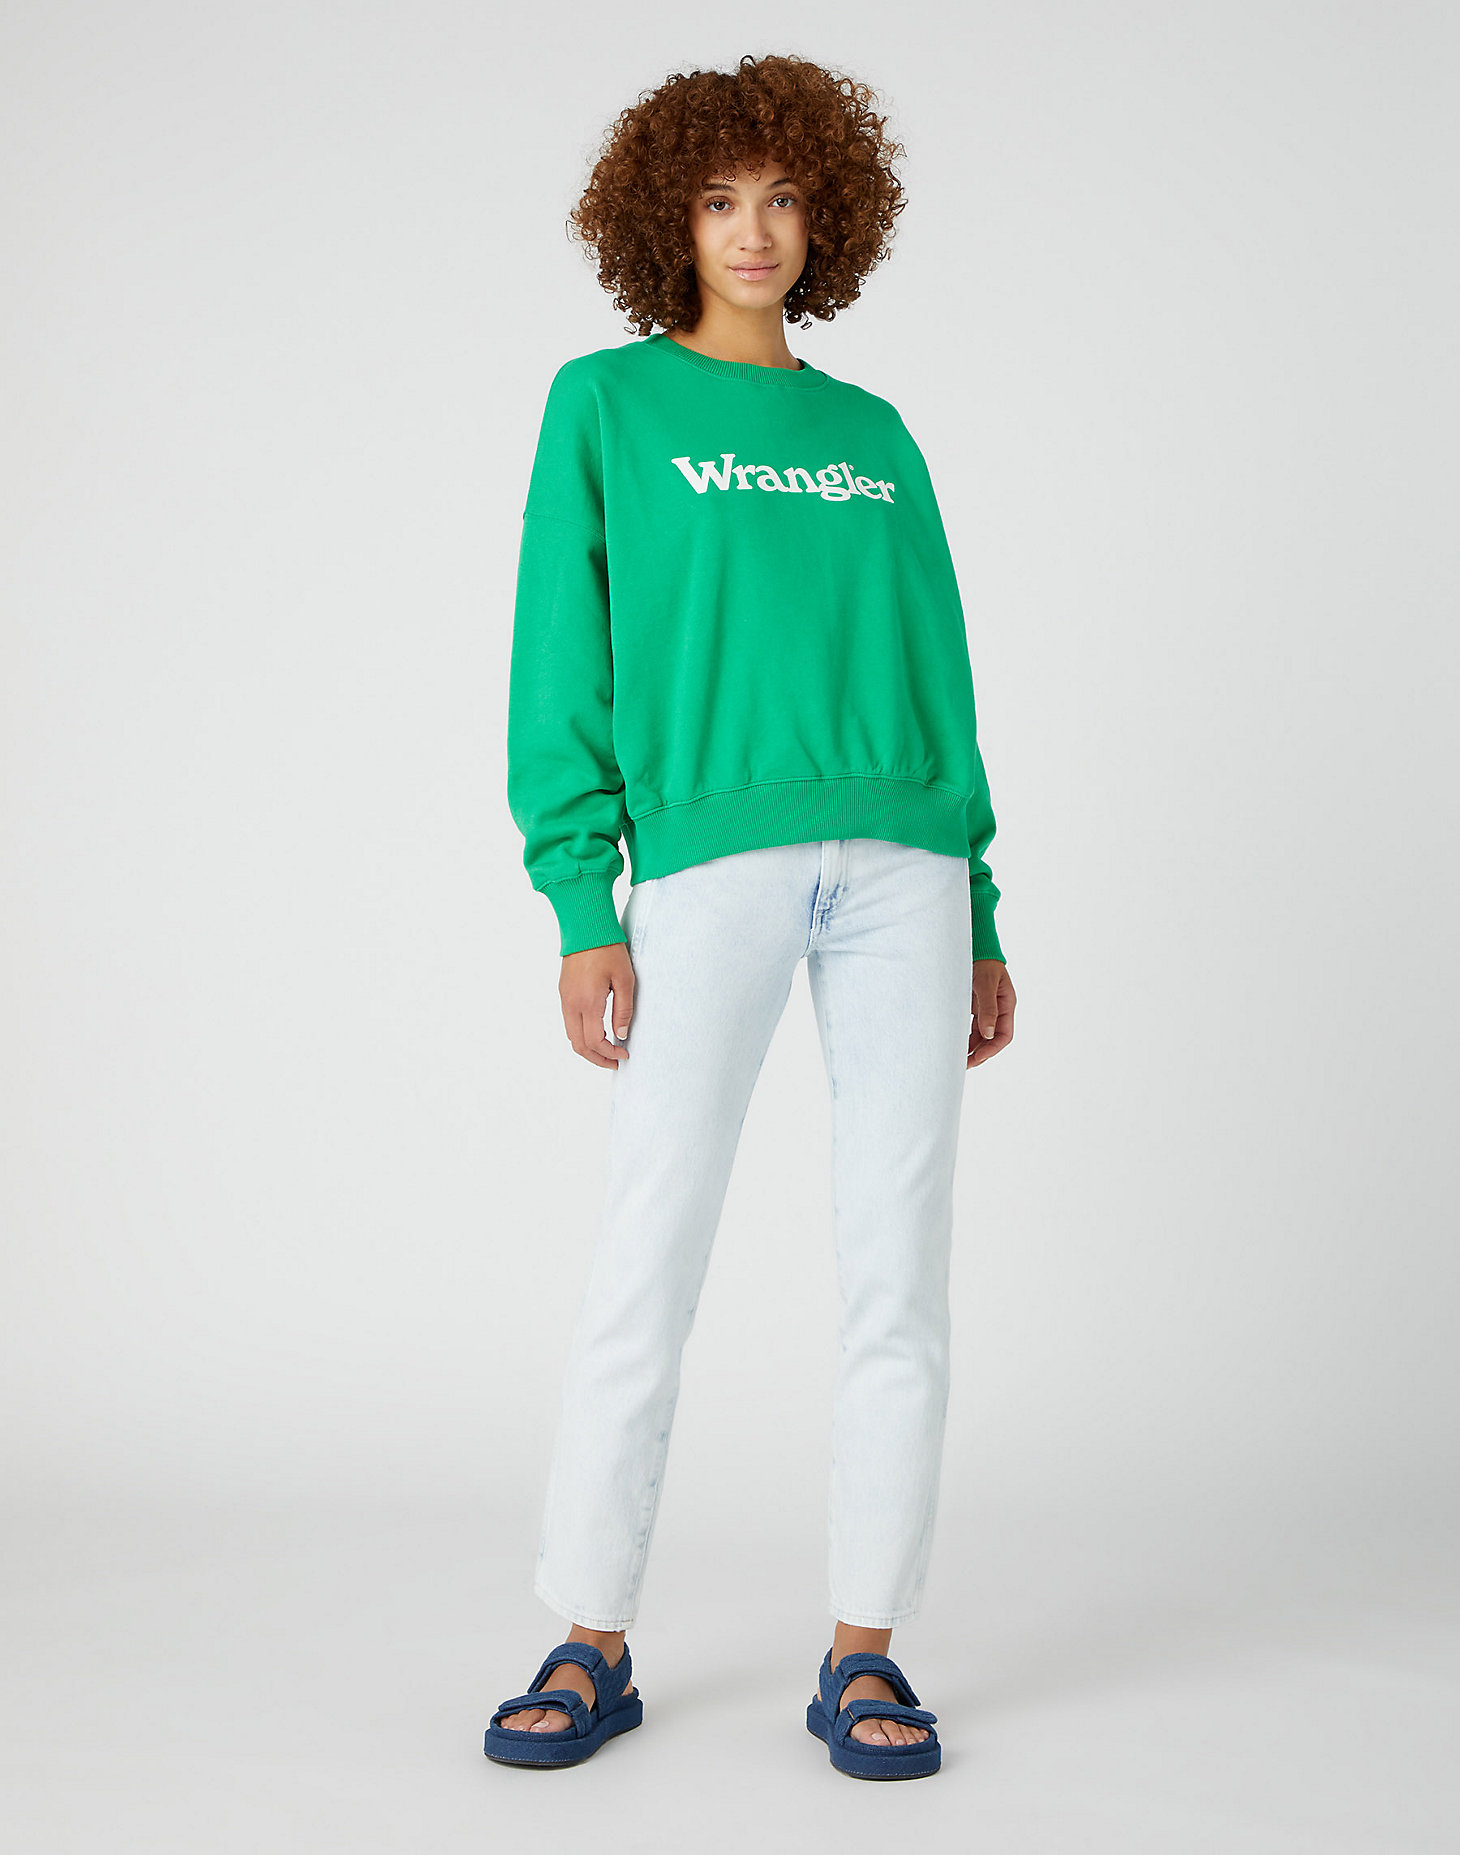 Relaxed Sweatshirt in Bright Green alternative view 1